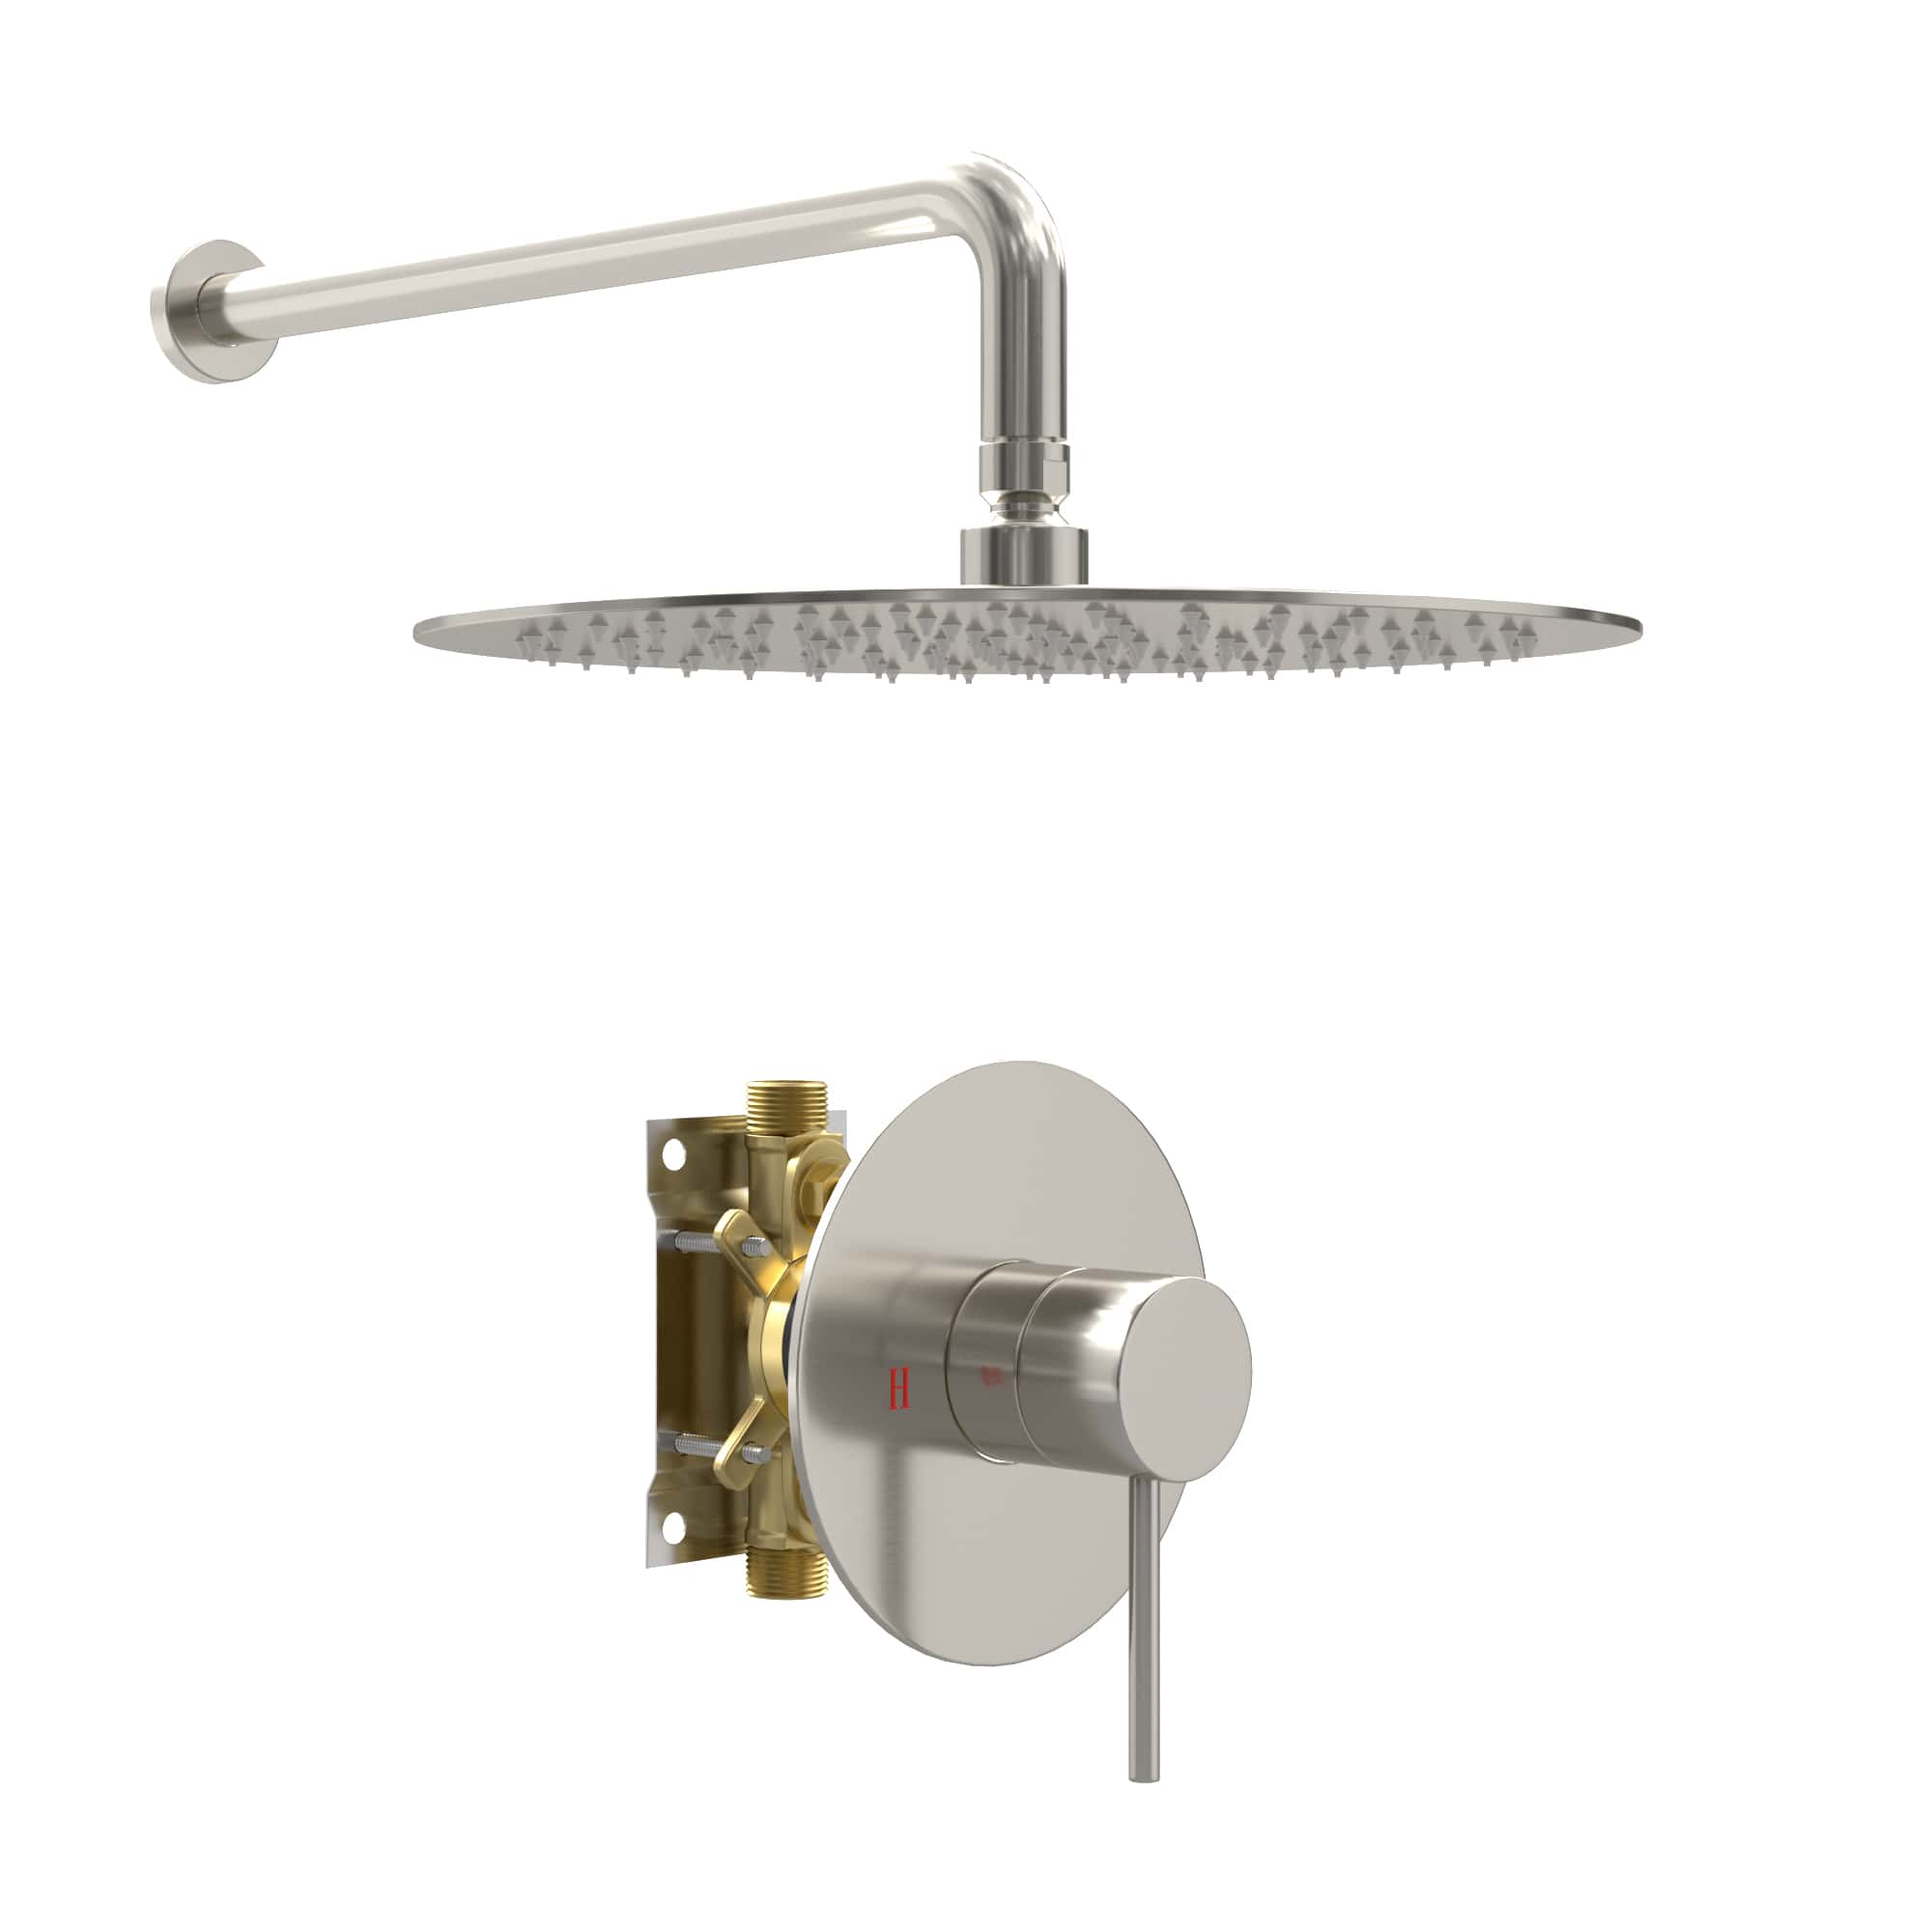 1-Spray Patterns 10 in. Stainless Steel Wall Mounted Fixed Shower Head in Brushed Nickel with Brass Body Valve